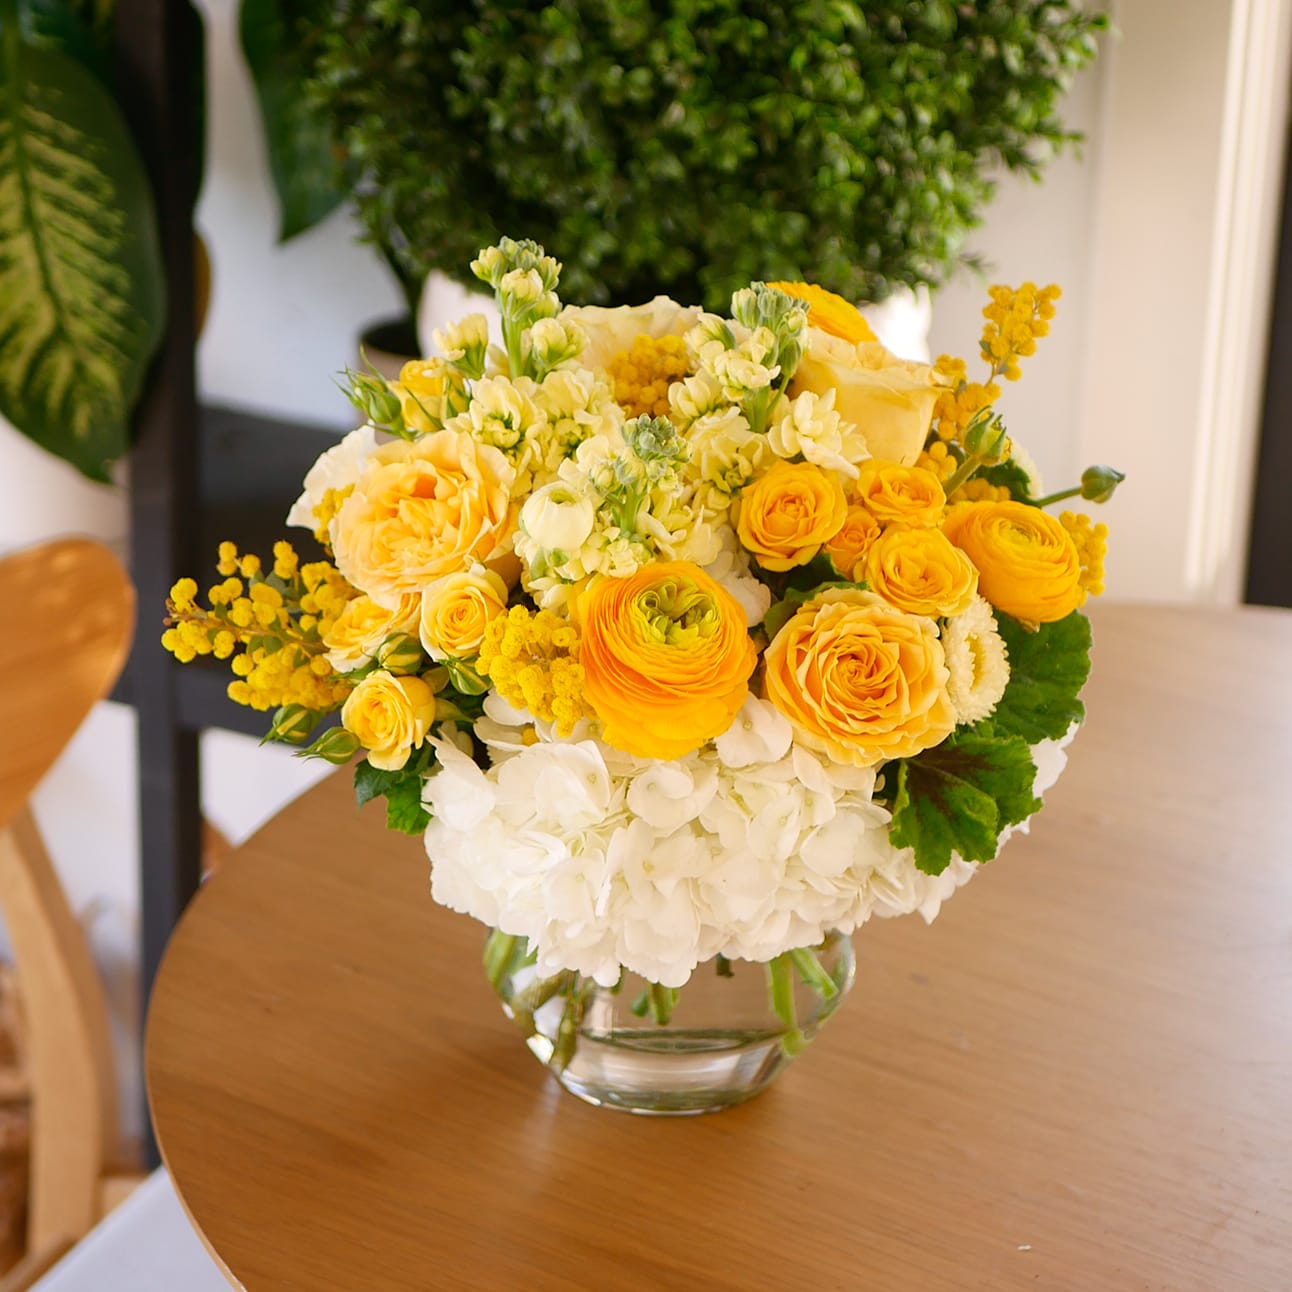 Eternal Sunshine - This bright arrangement features a stunning array of our best yellow blooms, including ranunculus, fragrant stock, roses, mimosa, matsumoto with white hydrangeas, elegantly displayed in a glass vase. Perfect for bringing a touch of vibrant sunshine indoors, making it an ideal choice for those seeking a timeless floral centerpiece to light up their home or celebrate a special occasion.